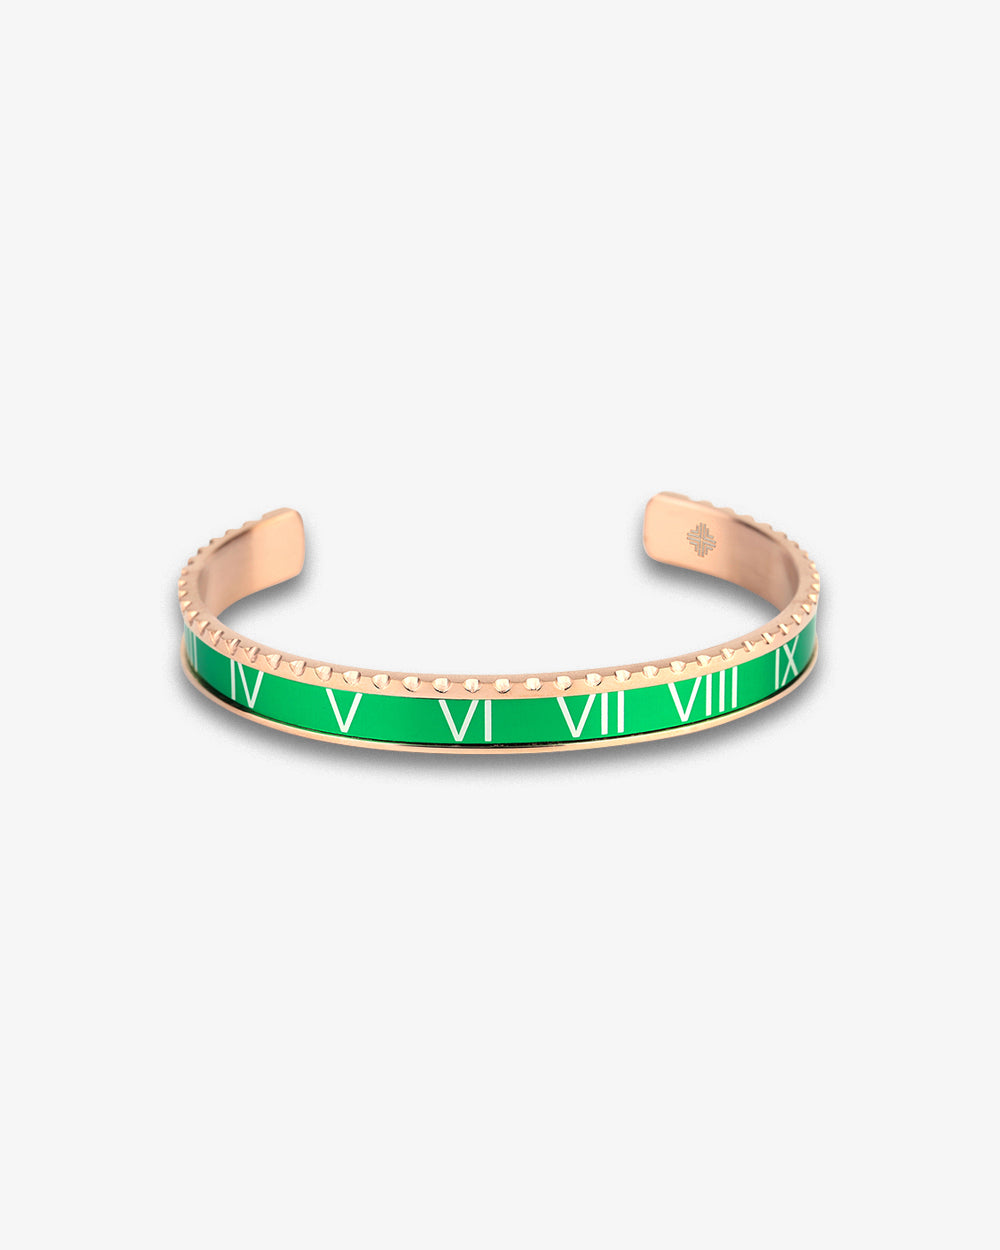 Swiss Concept Classic Roman Numeral Speed Bracelet (Green & Rose Gold) - Stainless Steel